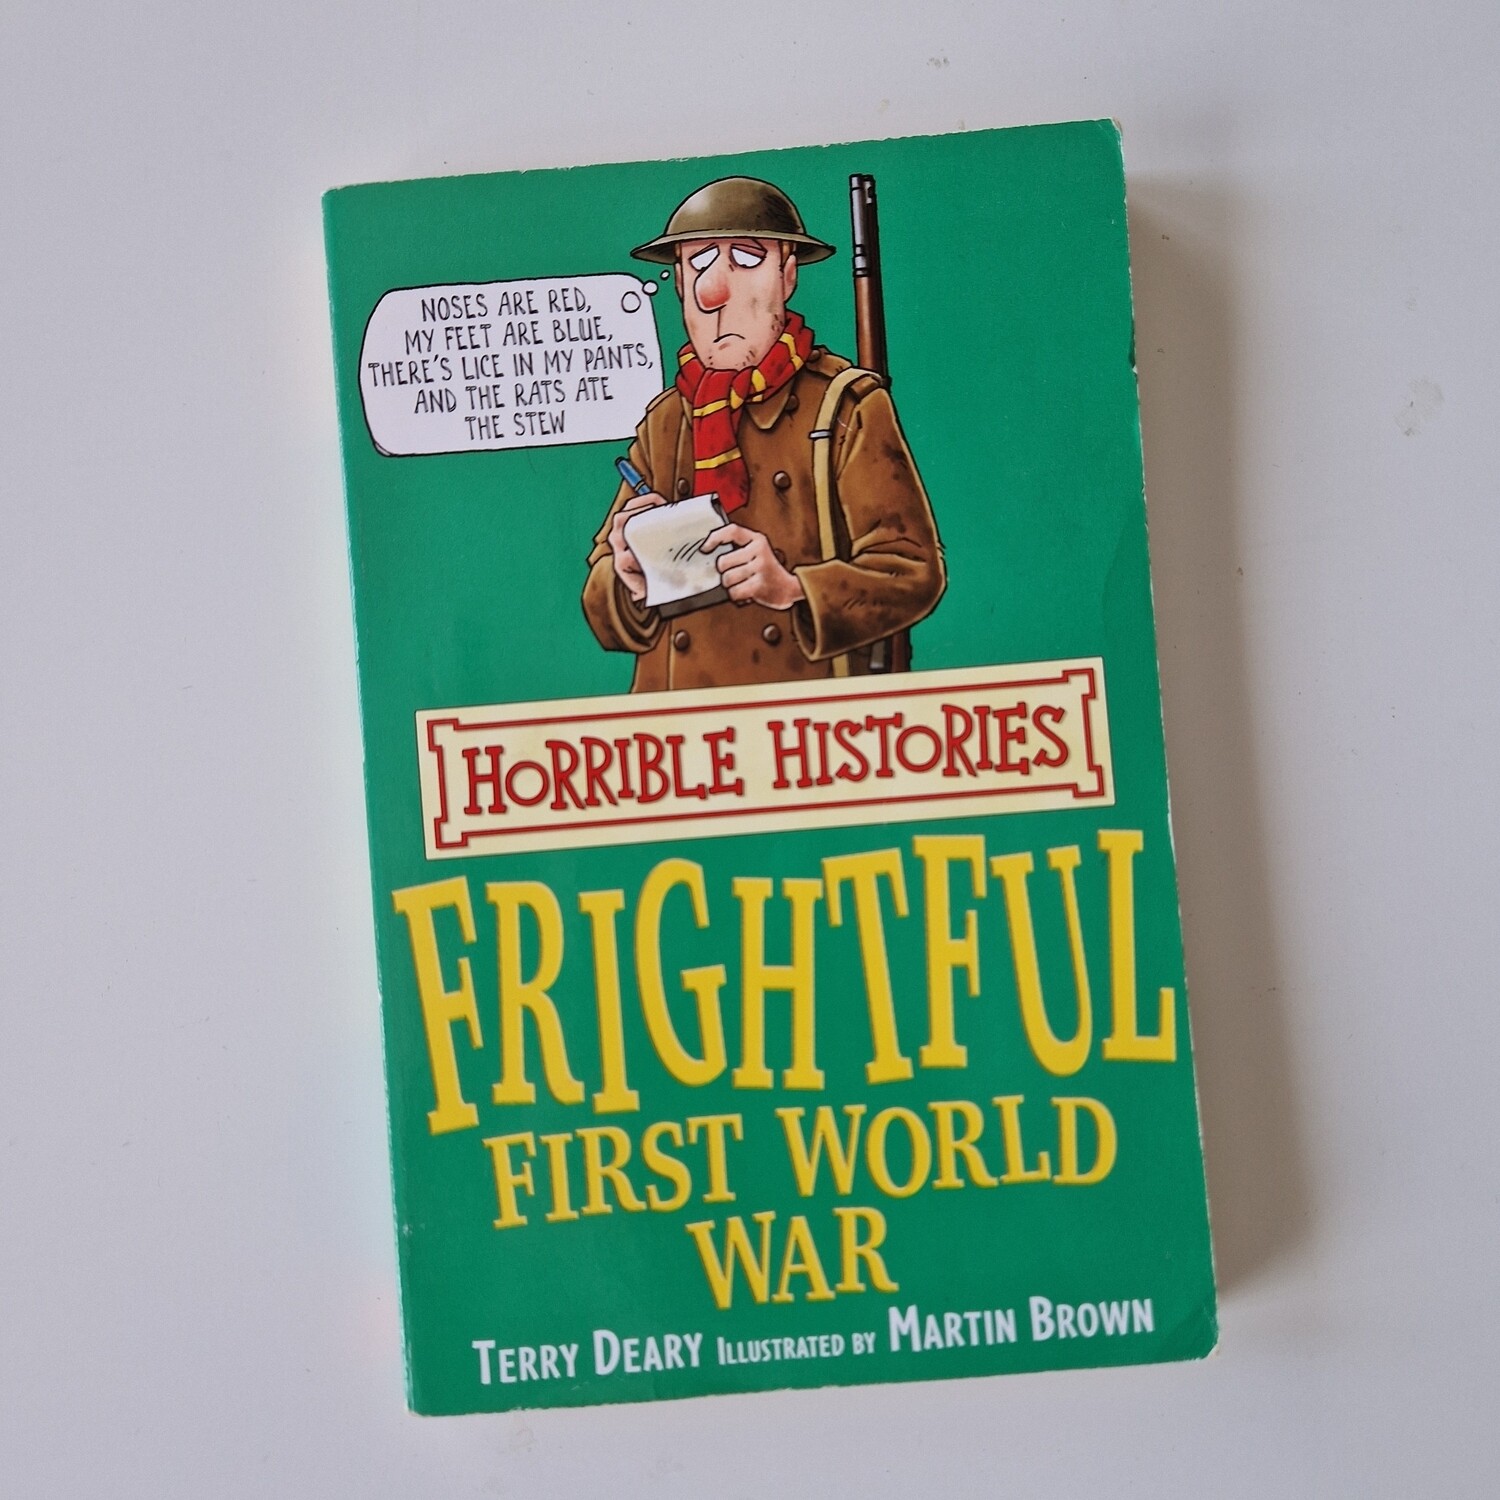 Frightful First World War - Horrible Histories Notebook - made from a paperback book